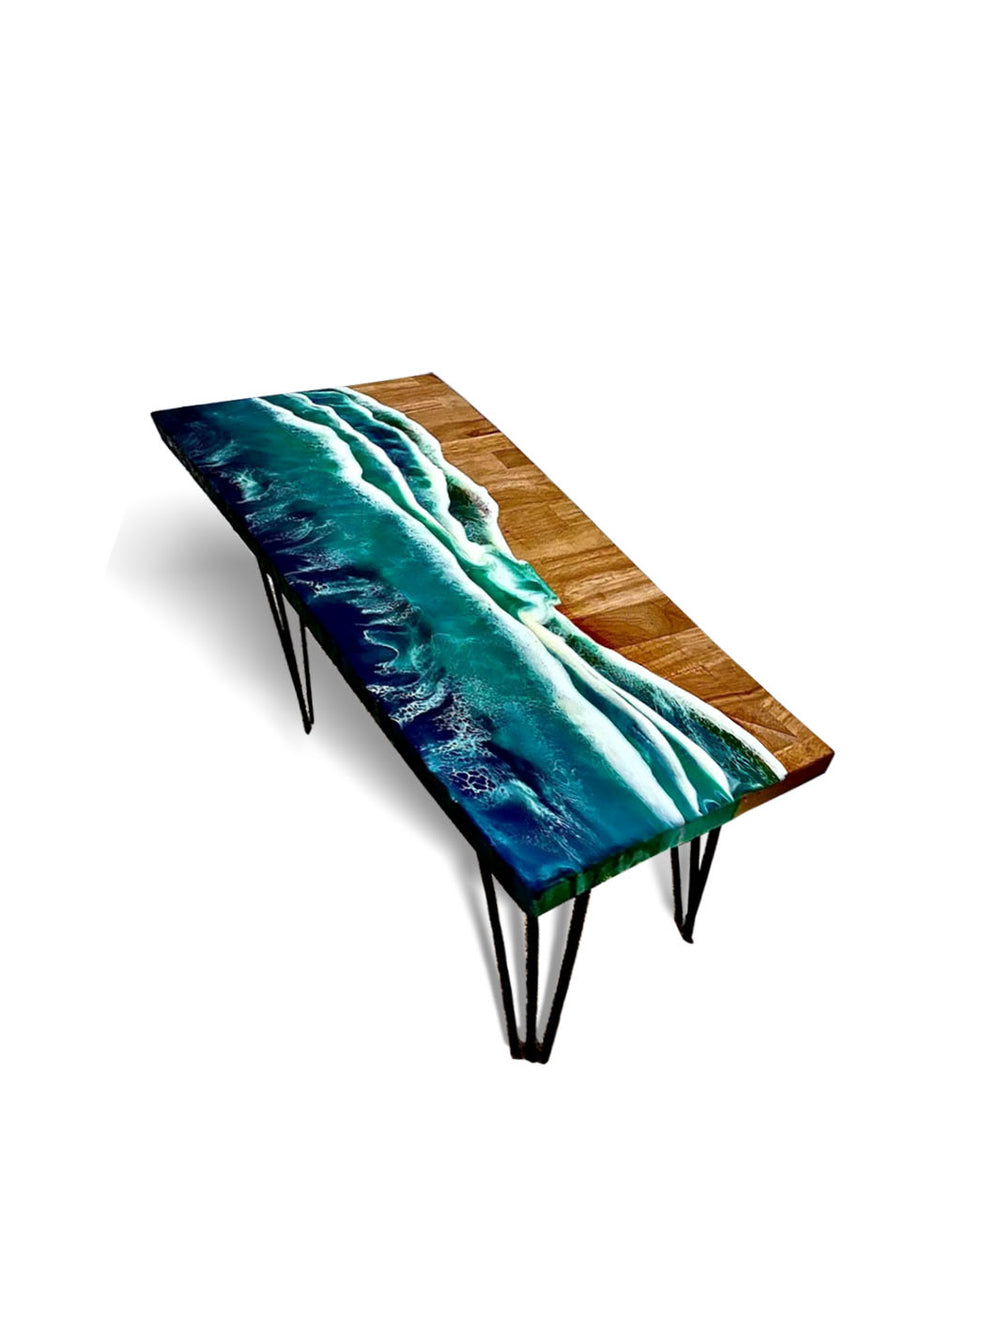 Handcrafted Beach Inspired Elongated Epoxy Resin Hevea Wood Table | 25â€Lx15â€W Artsheedal Tables ART0147-1